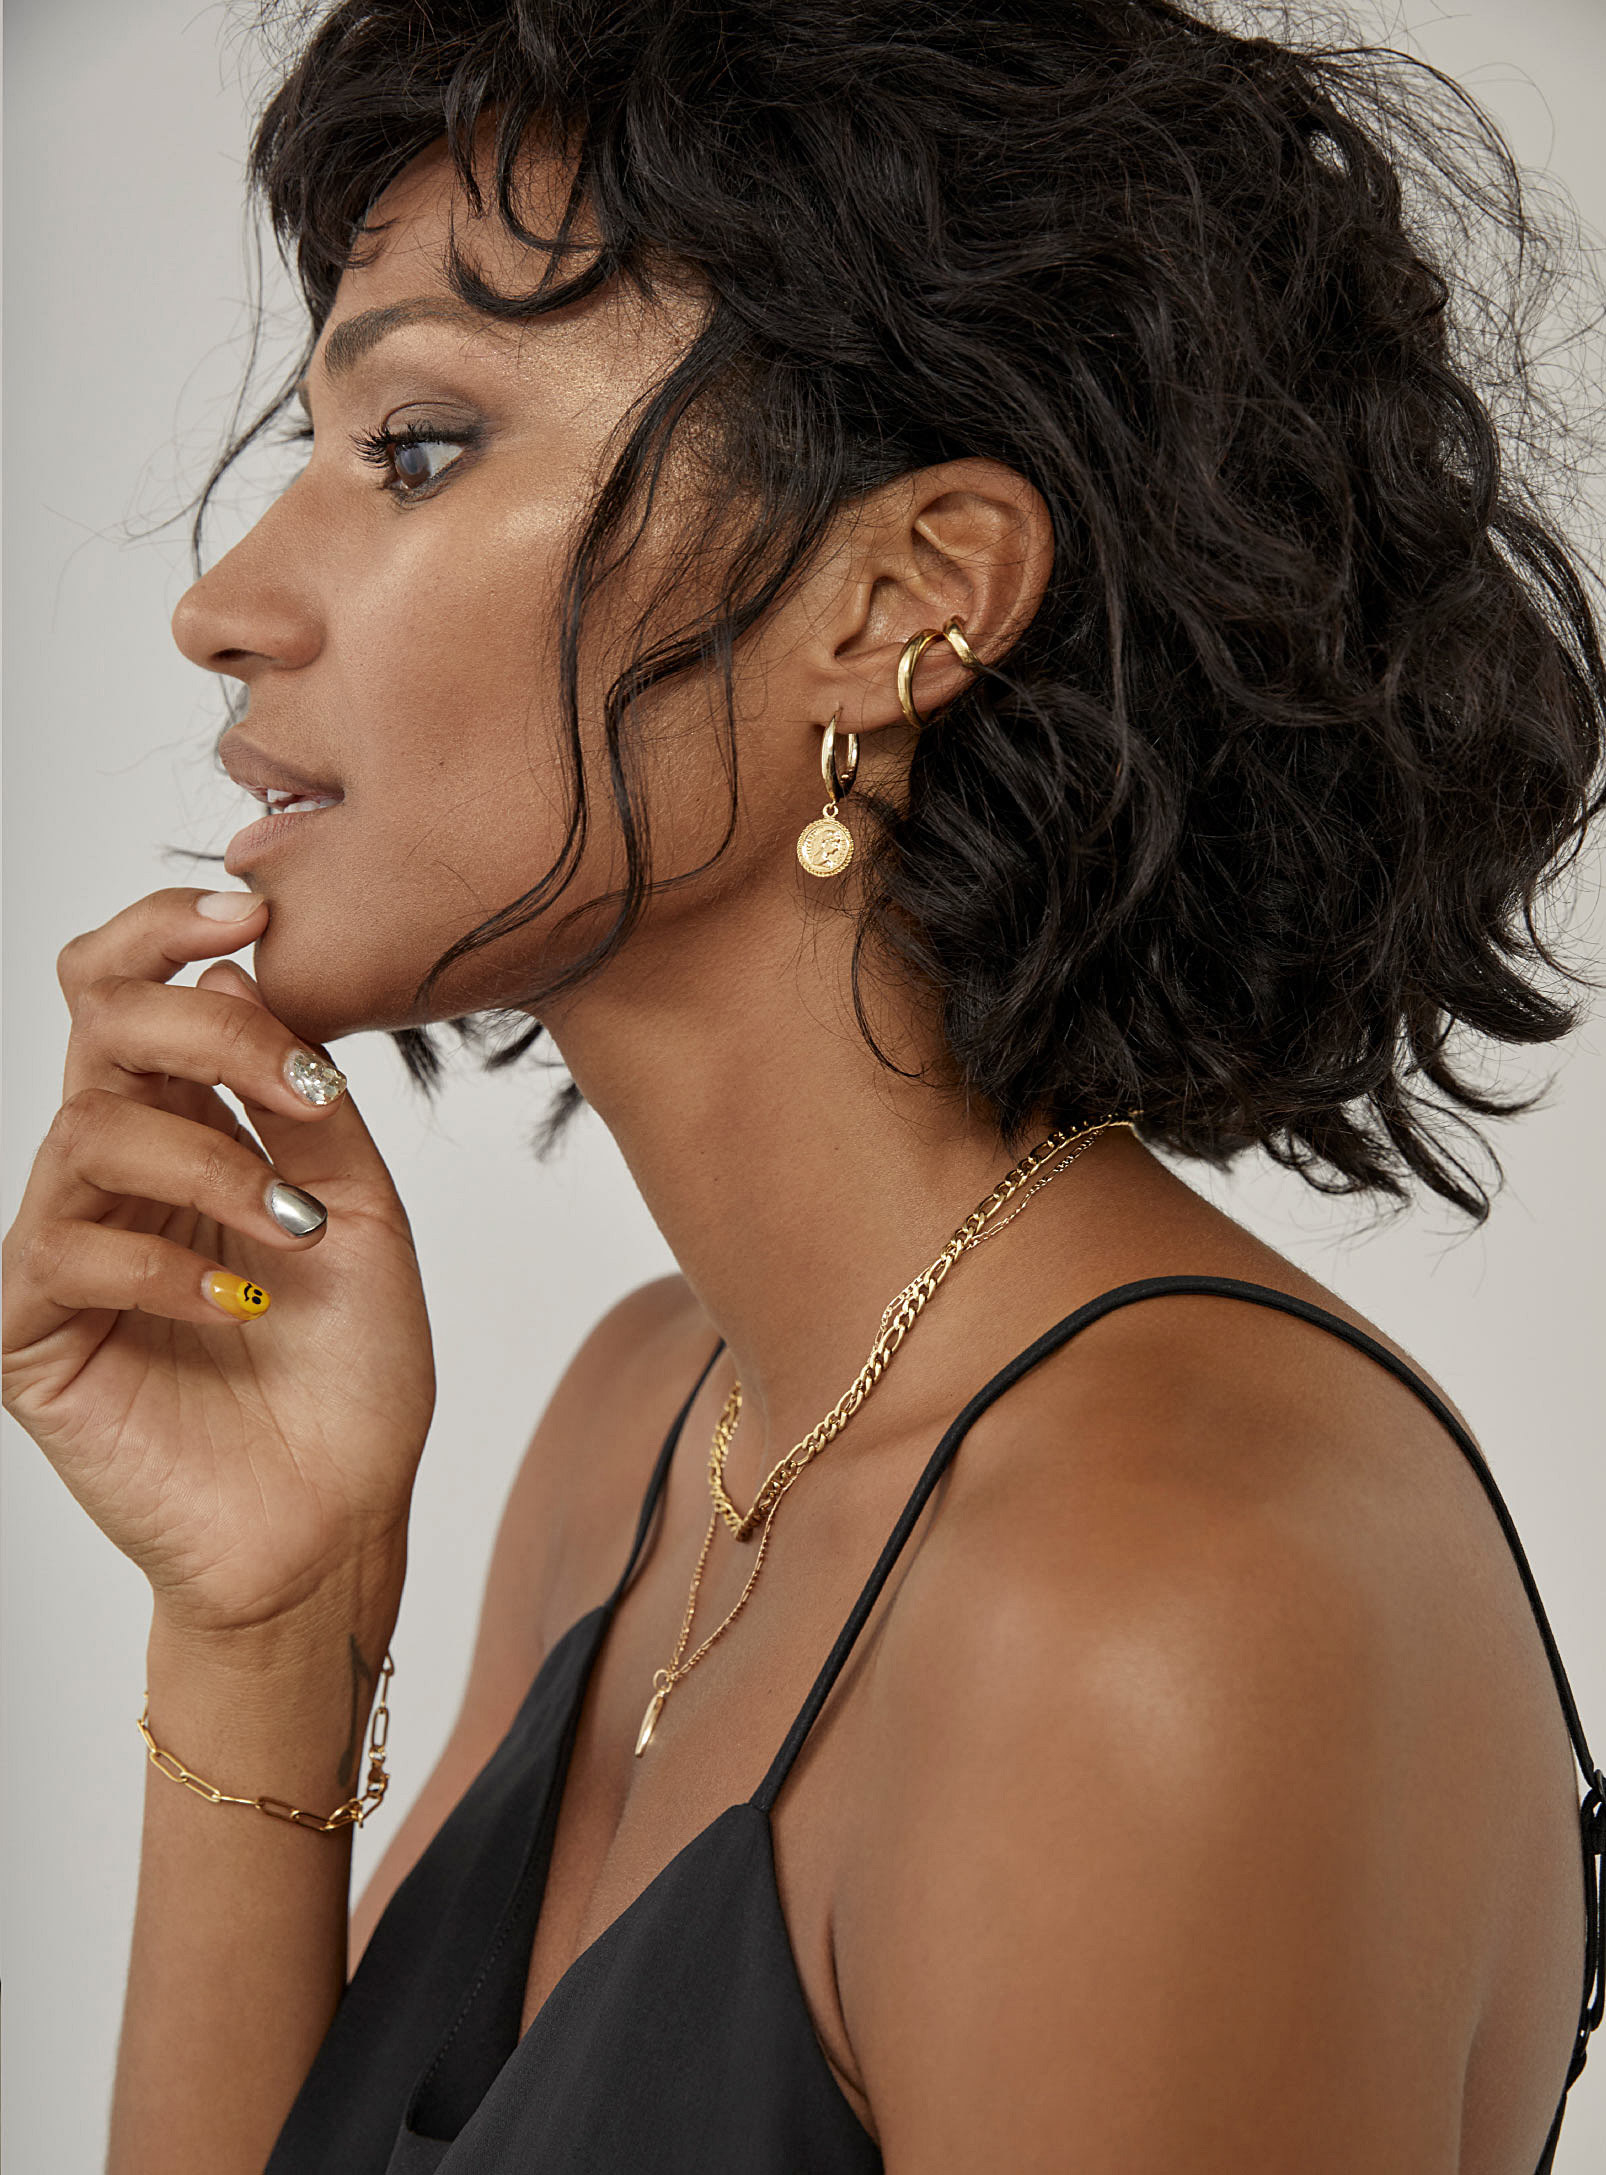 A person wearing a small hoop earring and two ear cuffs